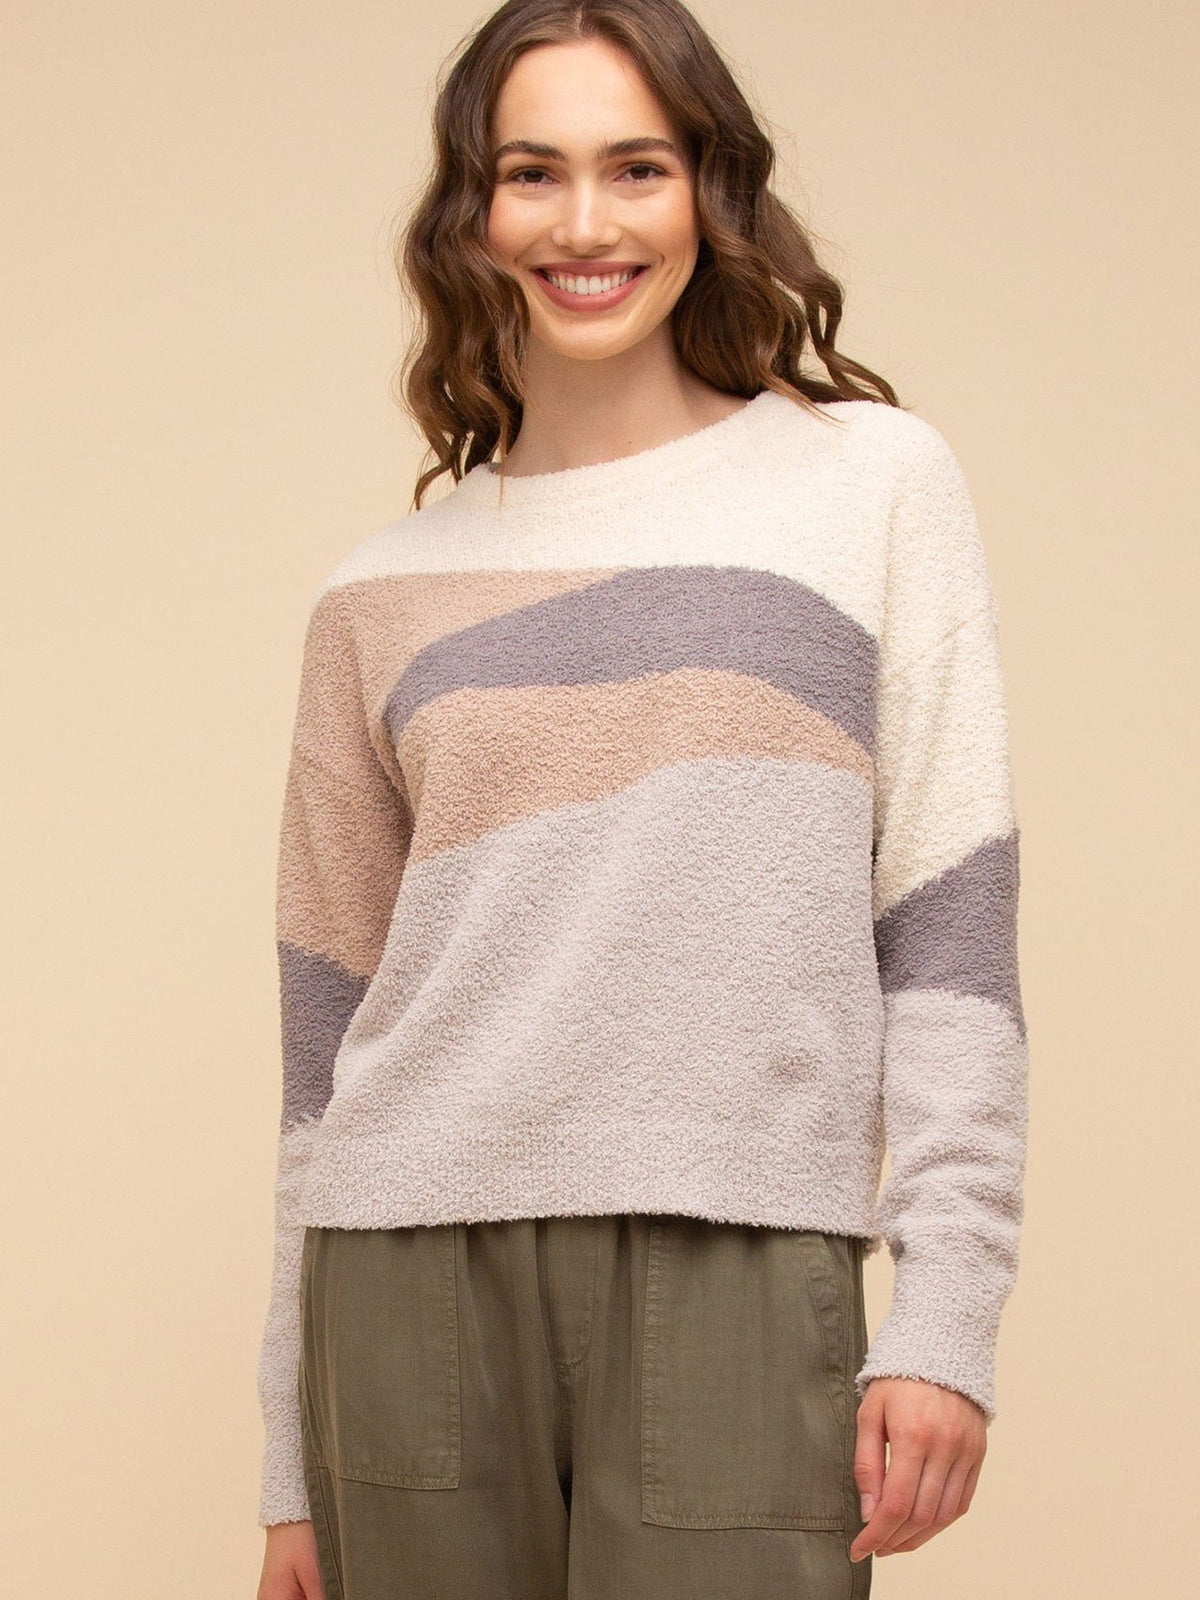 LAKESHORE SWEATER - PRE PACK 6 UNITS